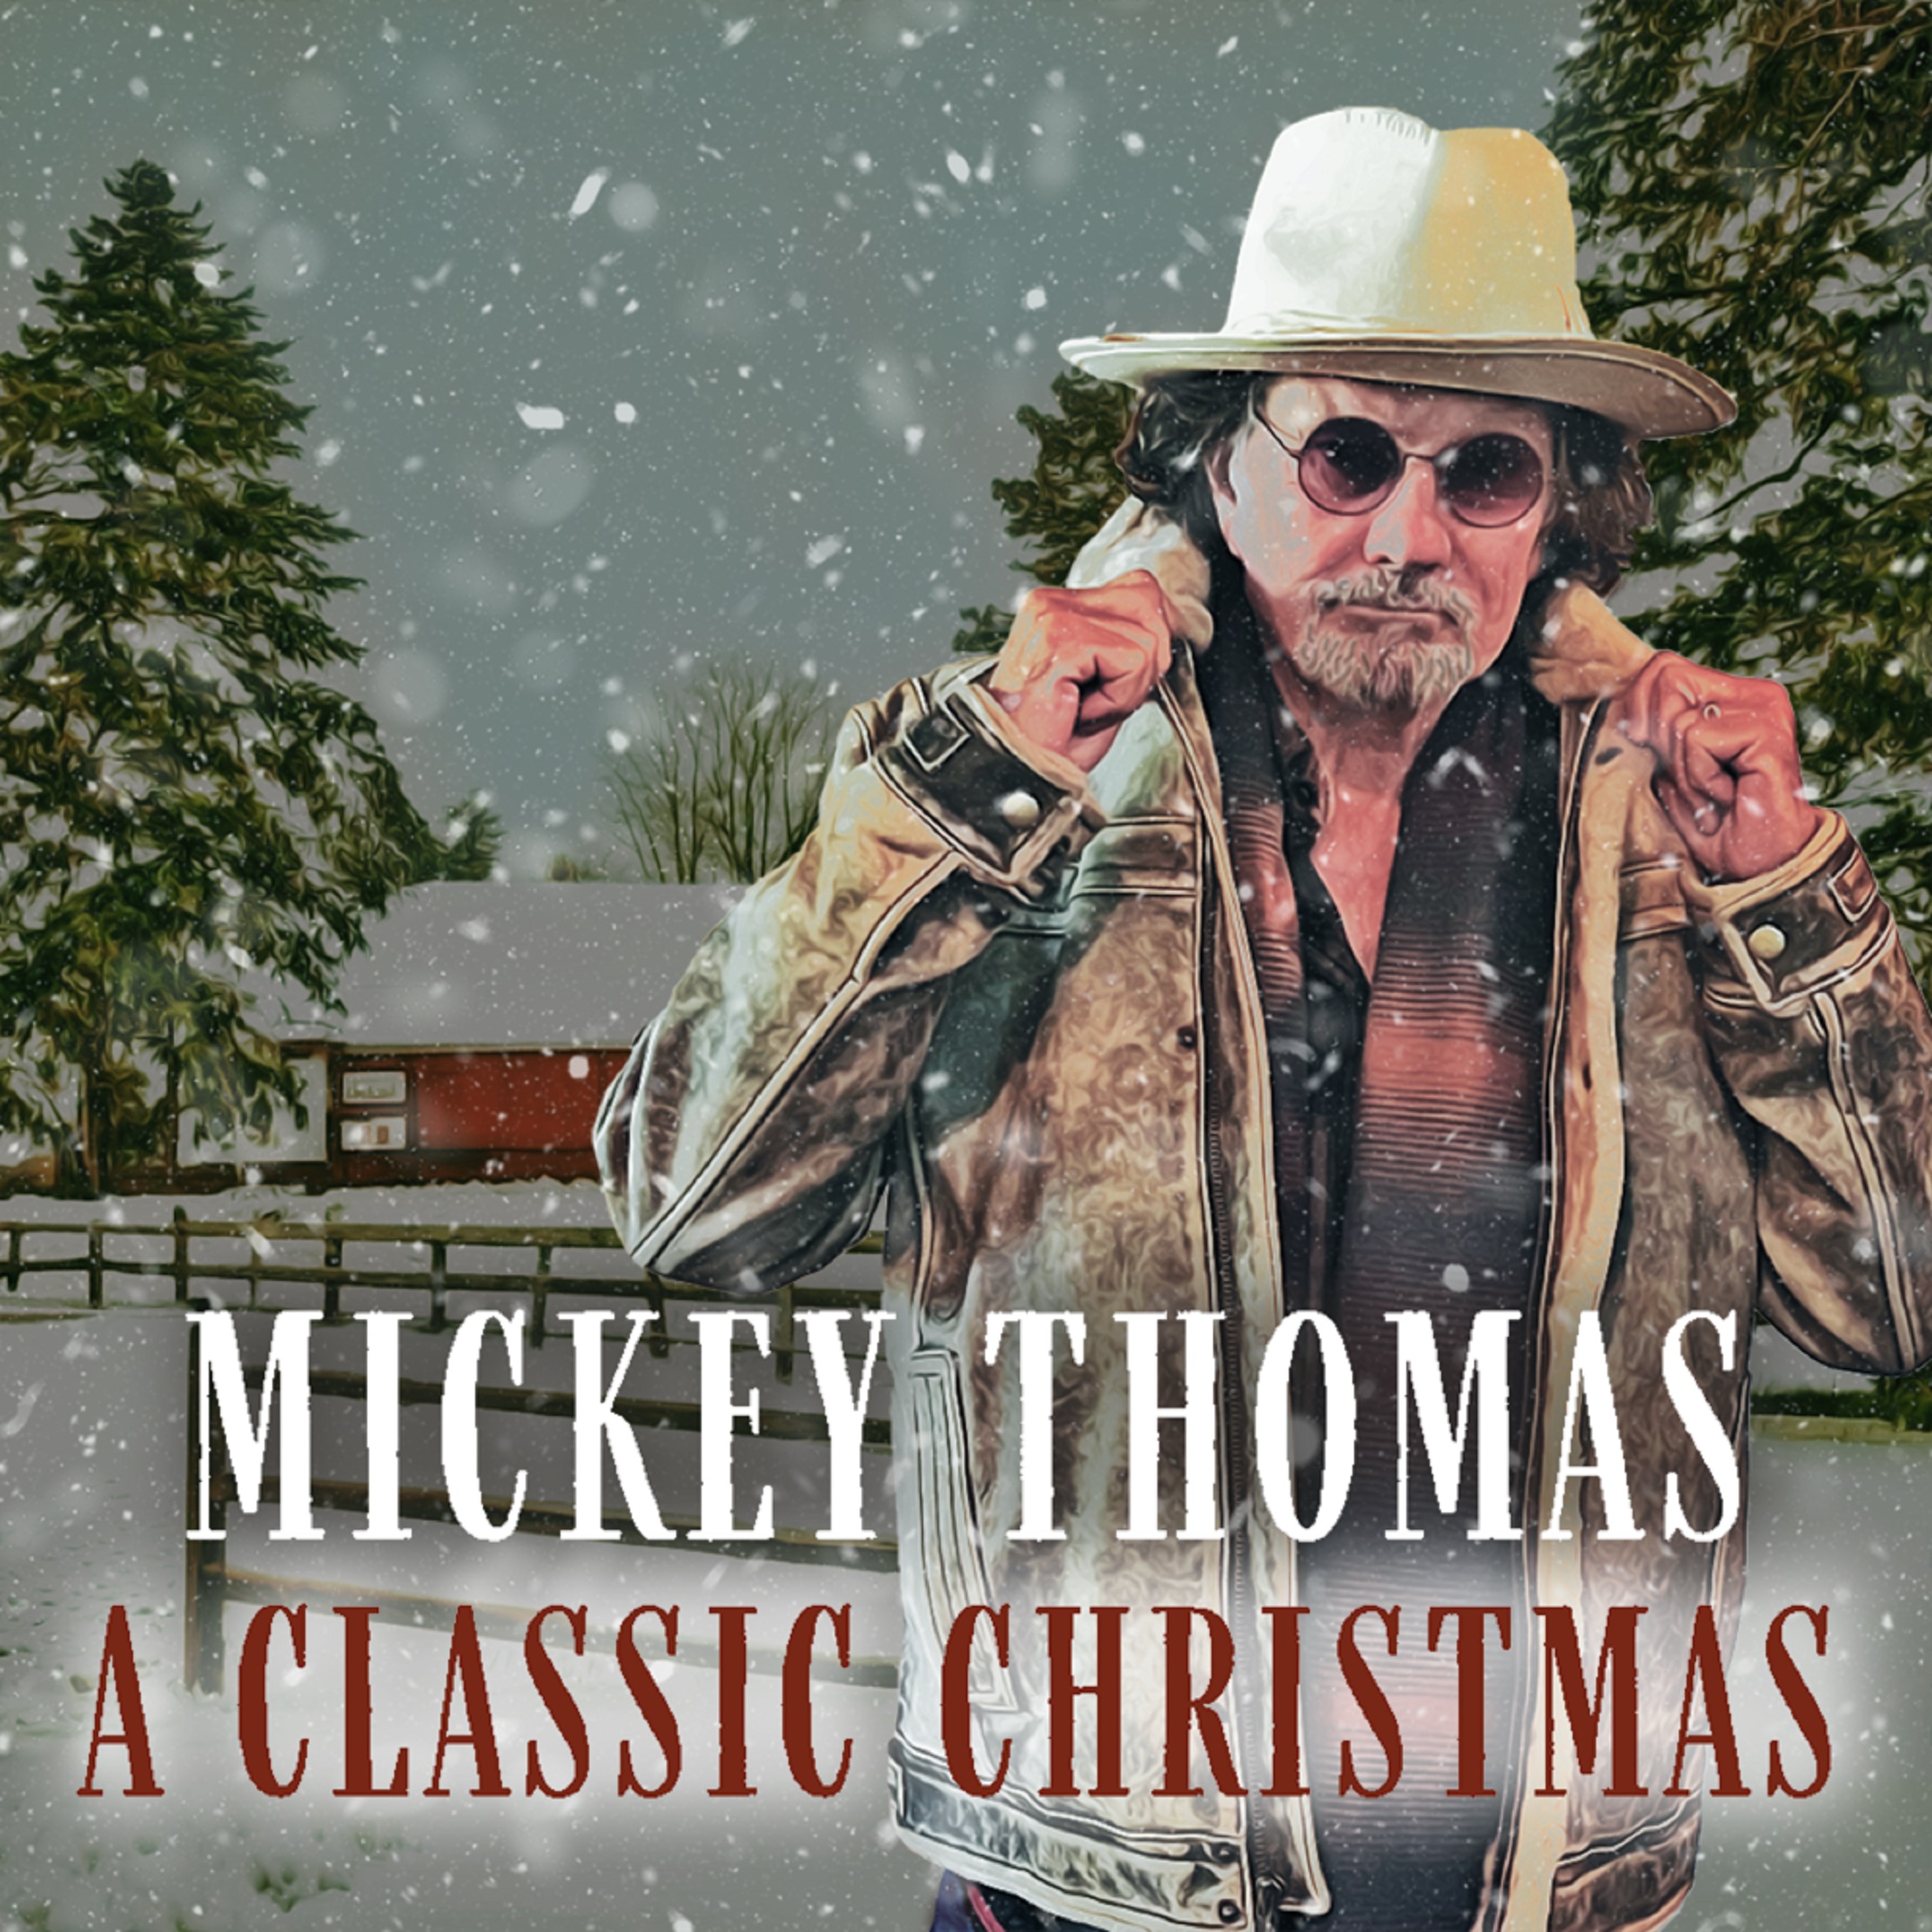 MICKEY THOMAS To Release “A Classic Christmas” Digital Two-Sided Single 12/1